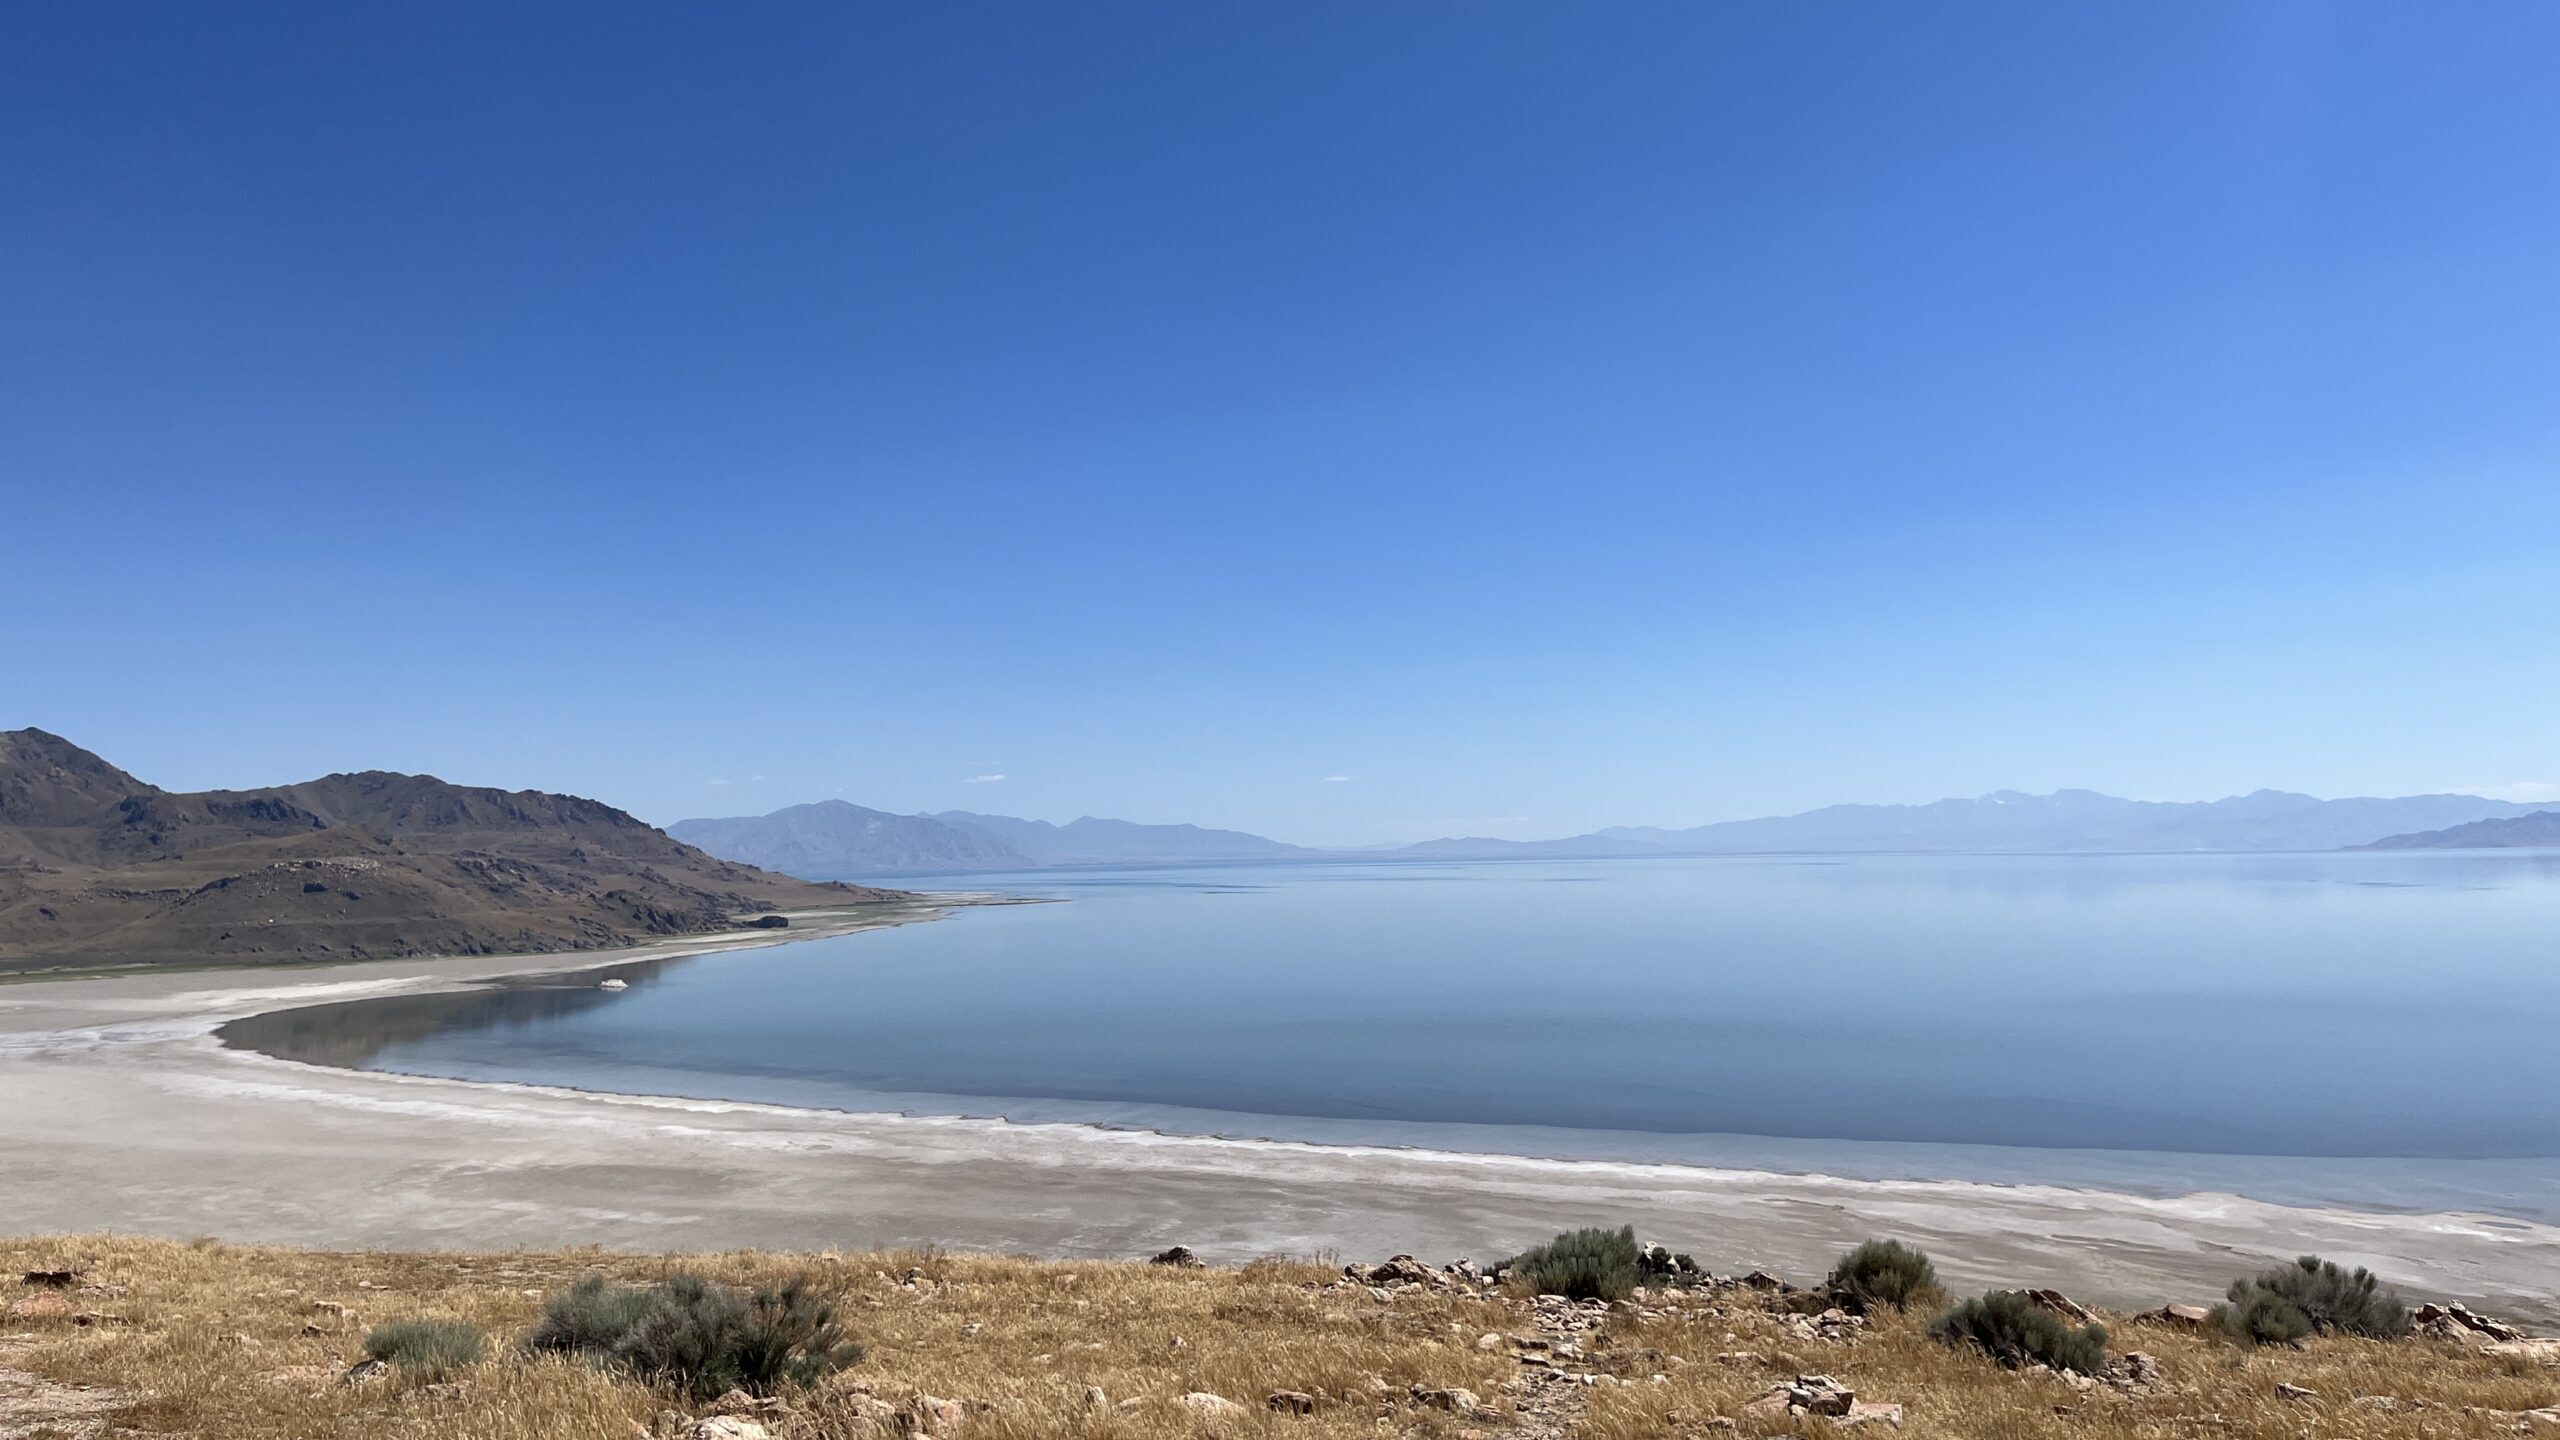 Image of the shoreline of Great Salt Lake, a body of water in Utah to which actor Leonardo DiCaprio...